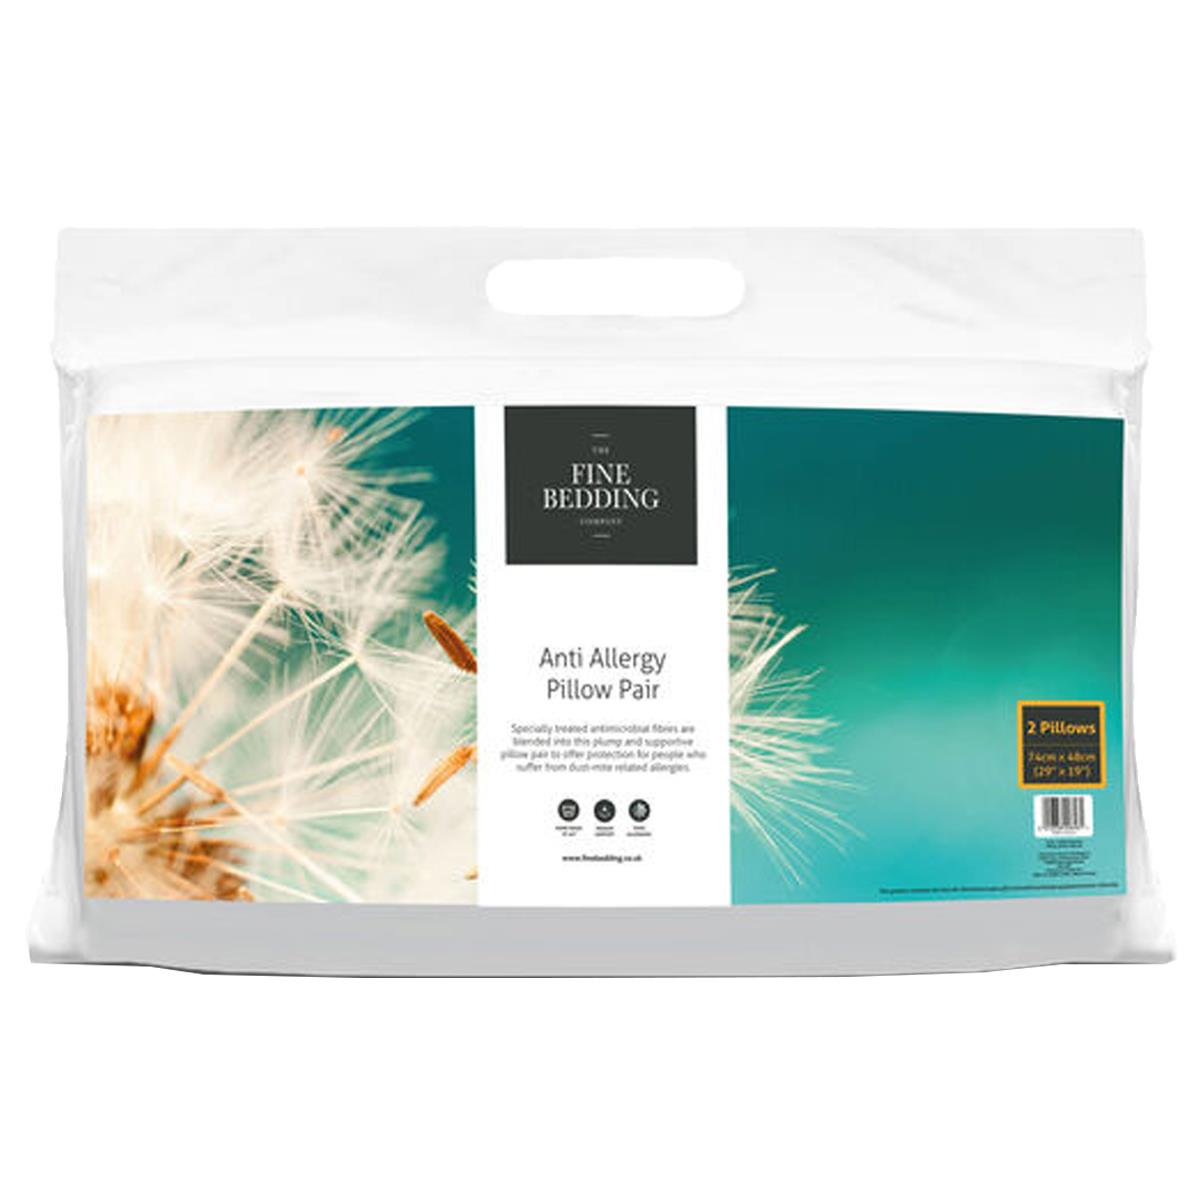 The Fine Bedding Company Anti-Allergy Pillow Pair Questions & Answers